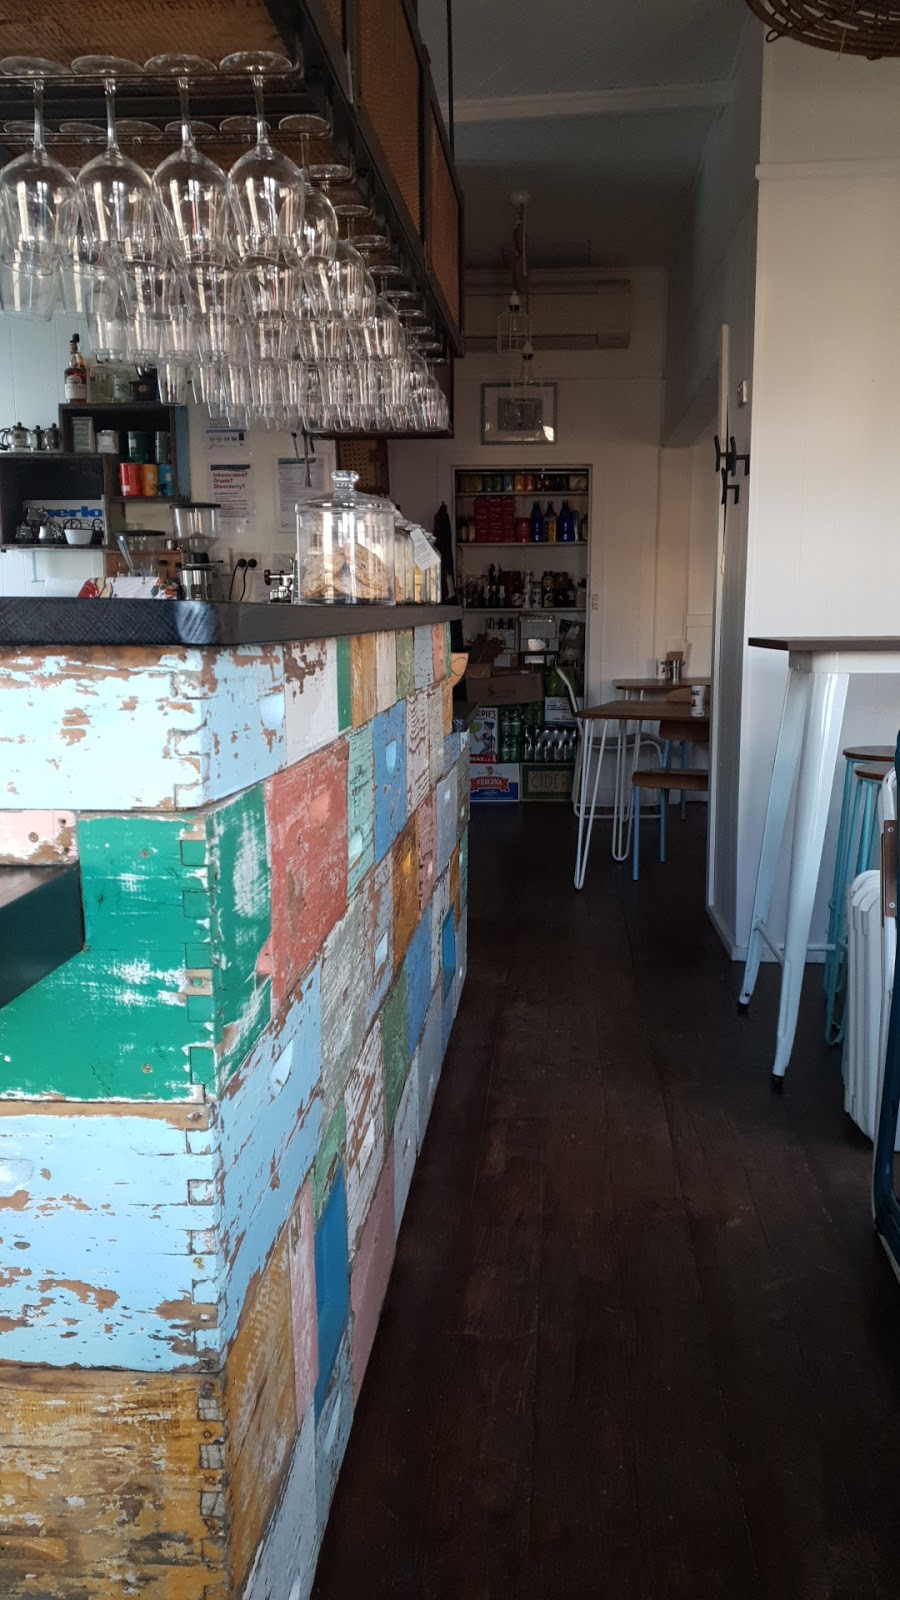 The Squid | cafe | 31 Camp St, Beechworth VIC 3747, Australia | 0409154251 OR +61 409 154 251